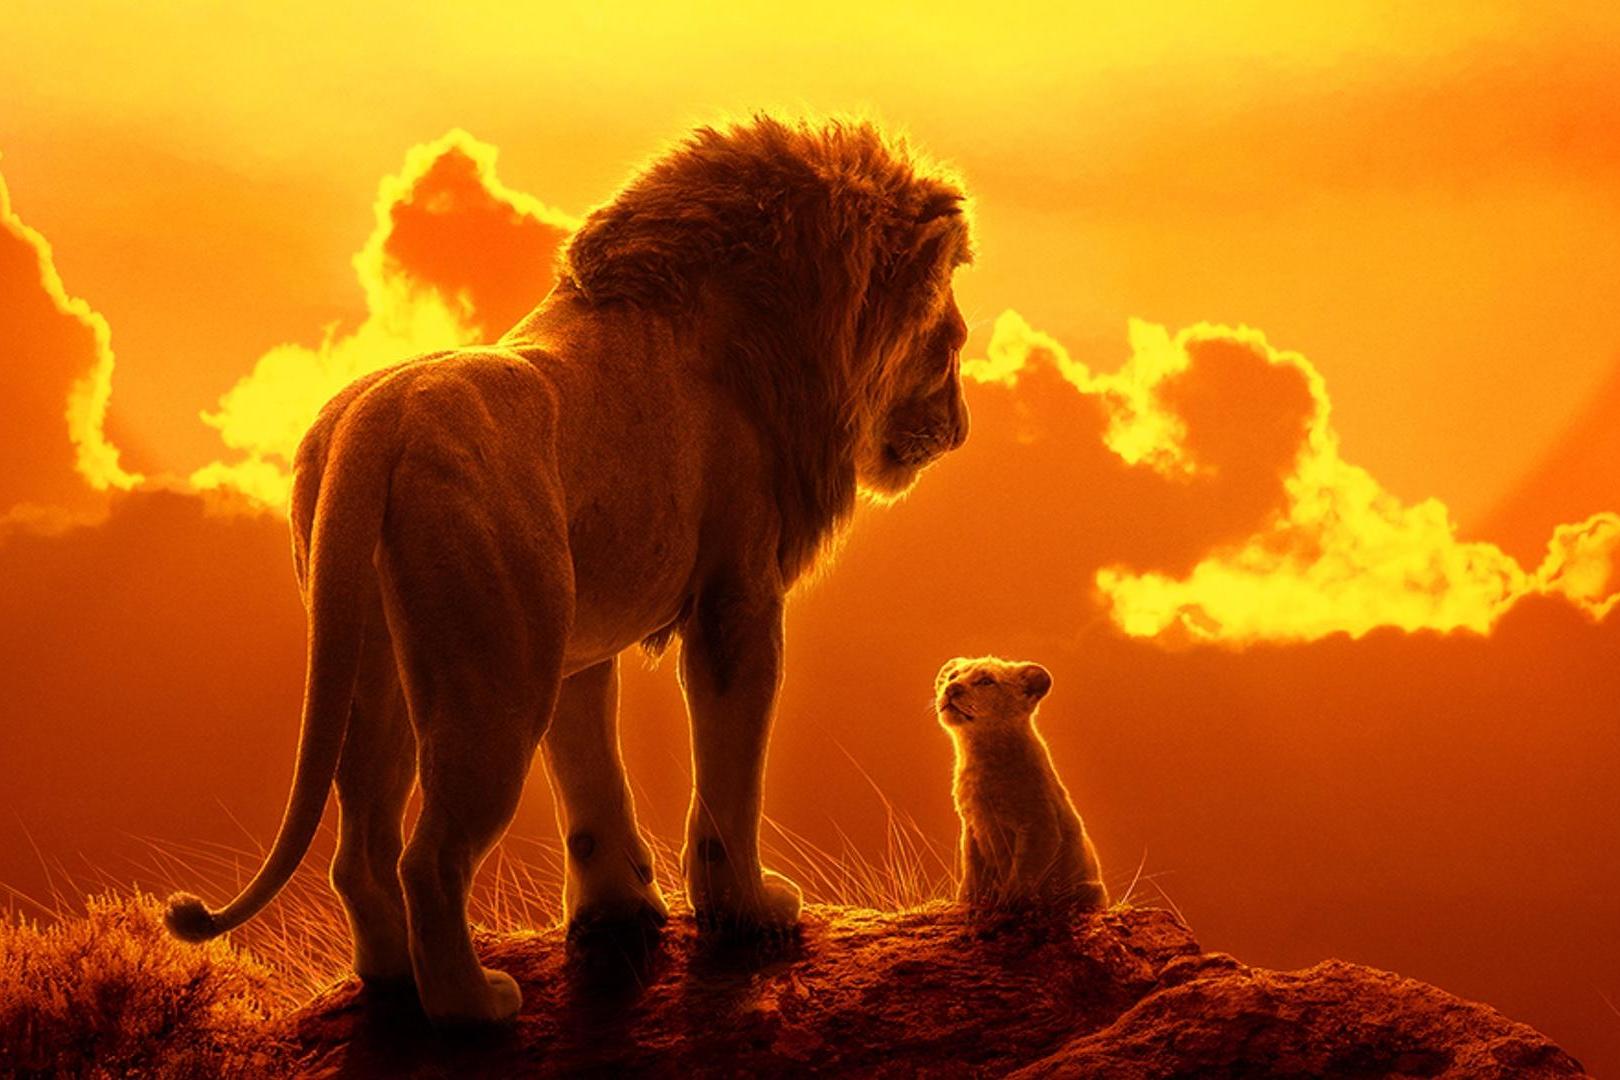 Who plays simba in the new lion king